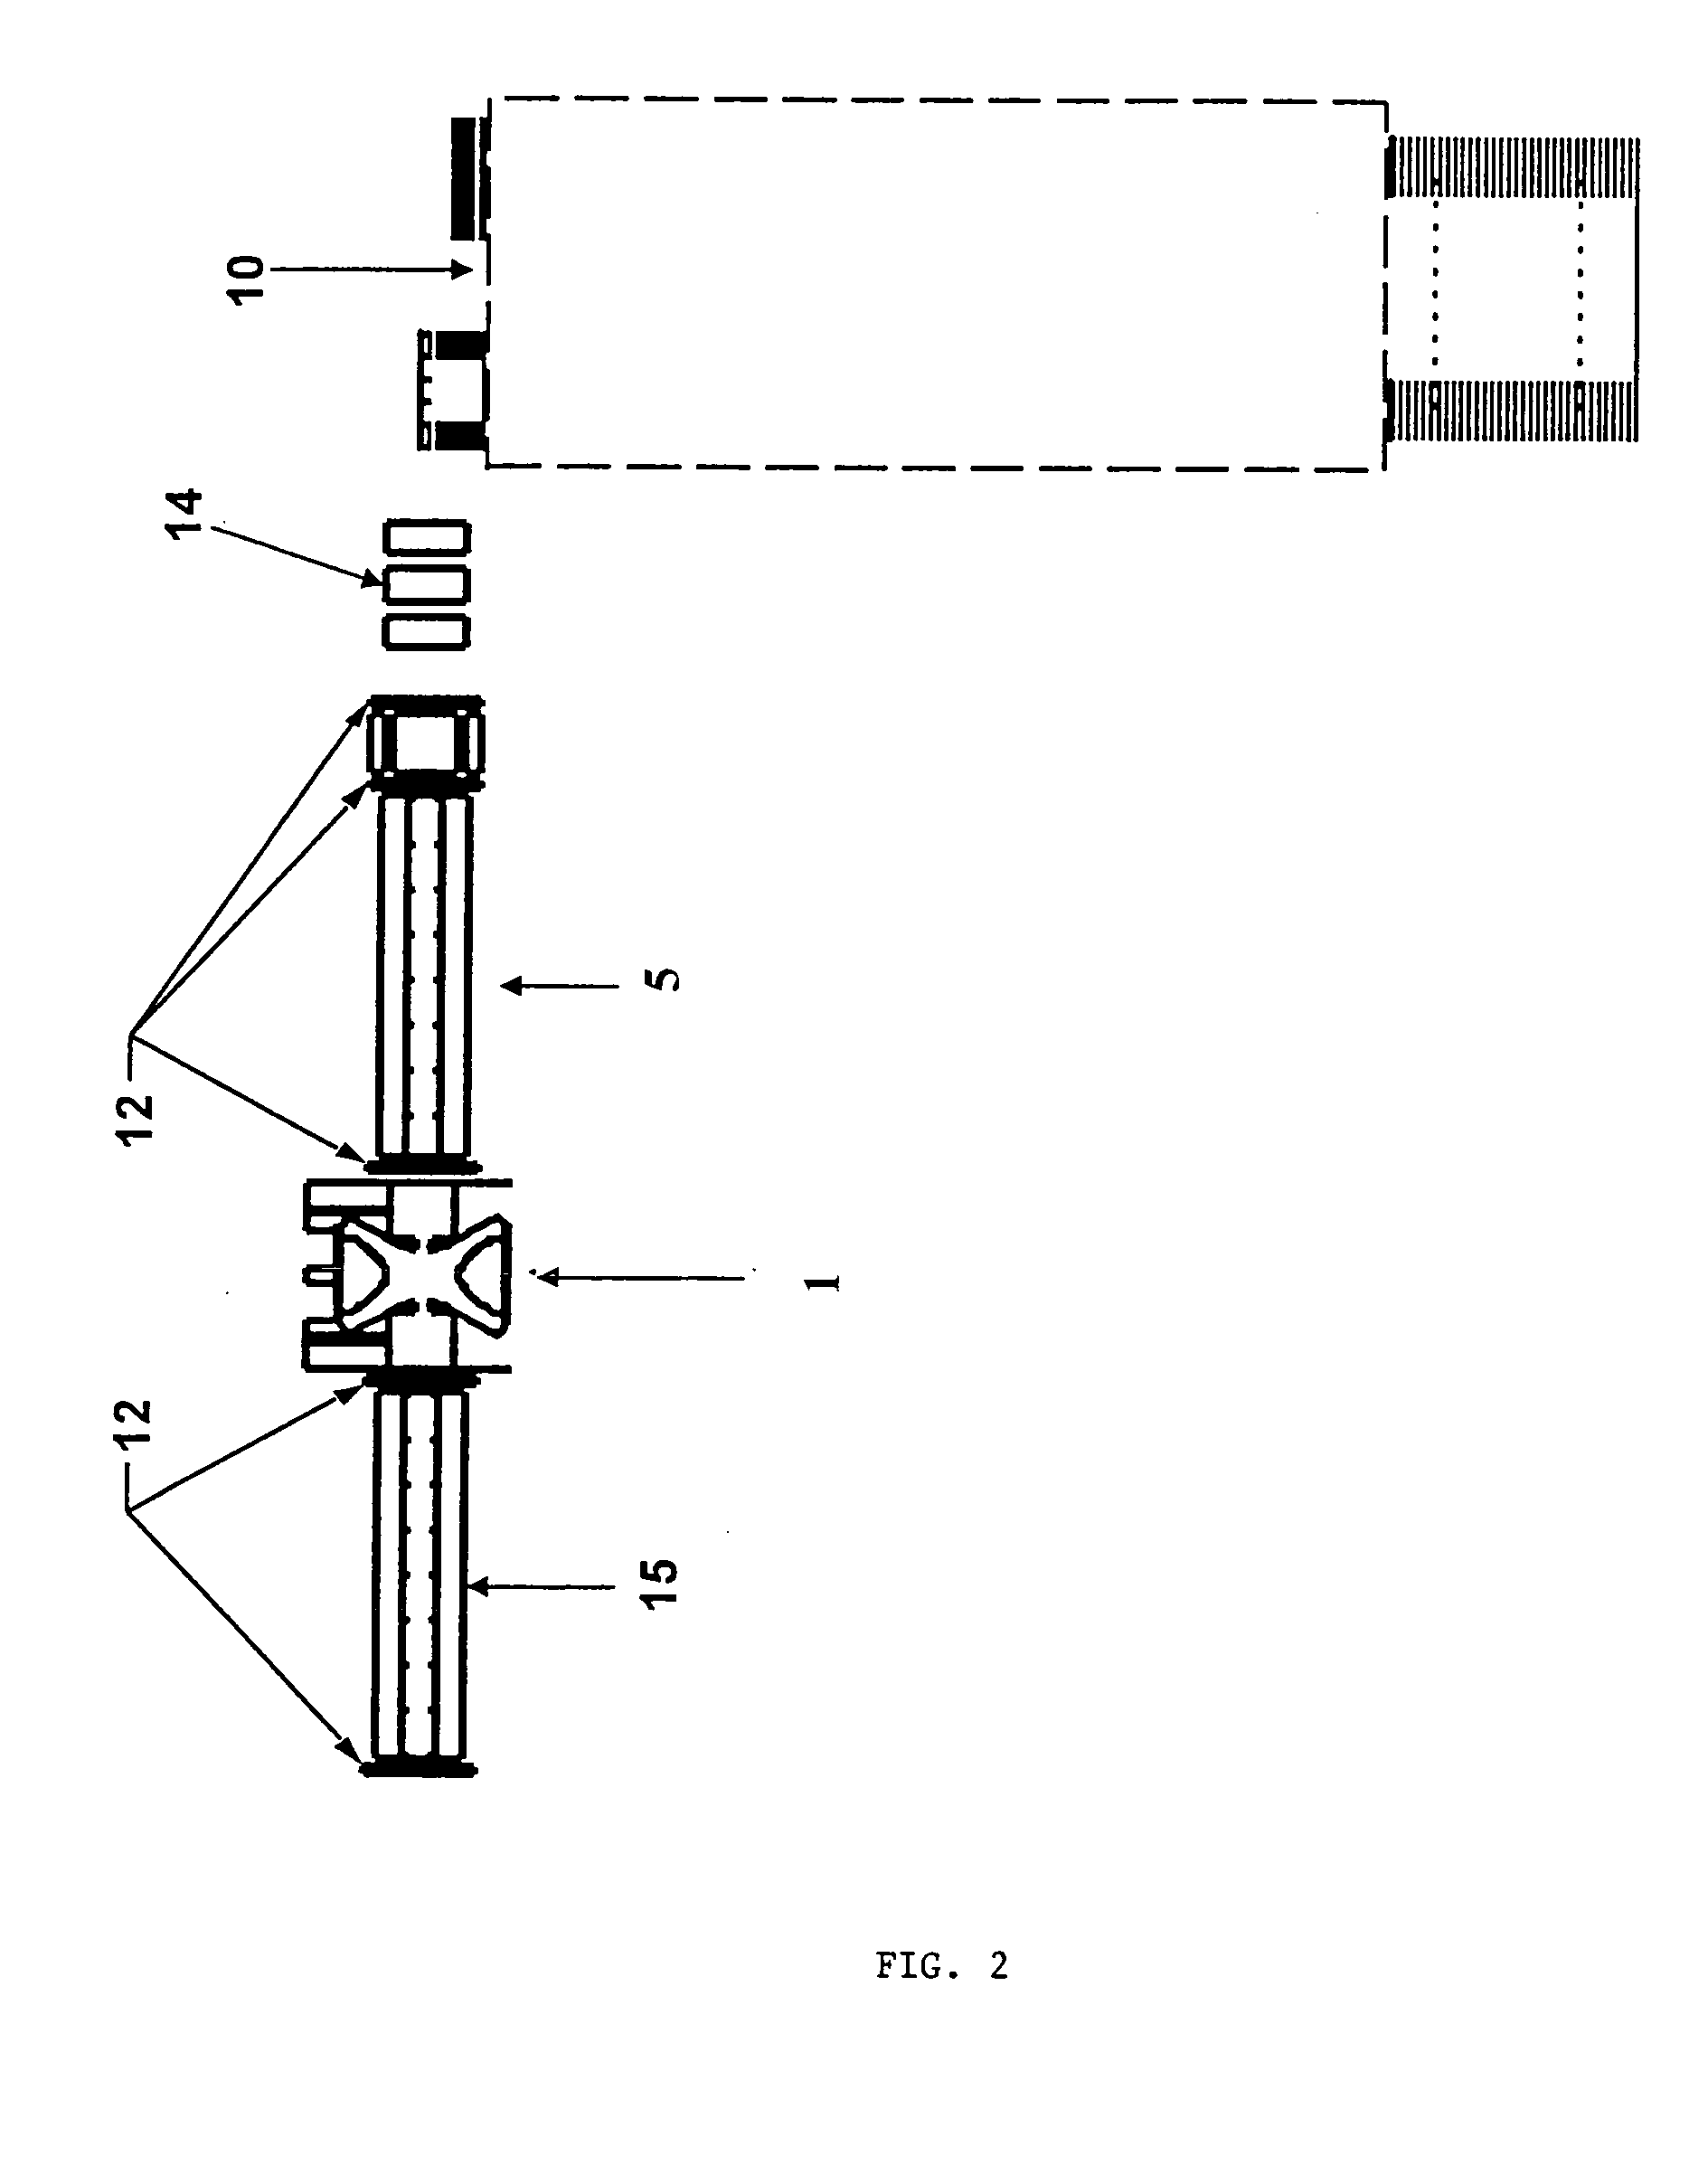 Tandem-in-time and-in-space mass spectrometer and associated method for tandem mass spectrometry